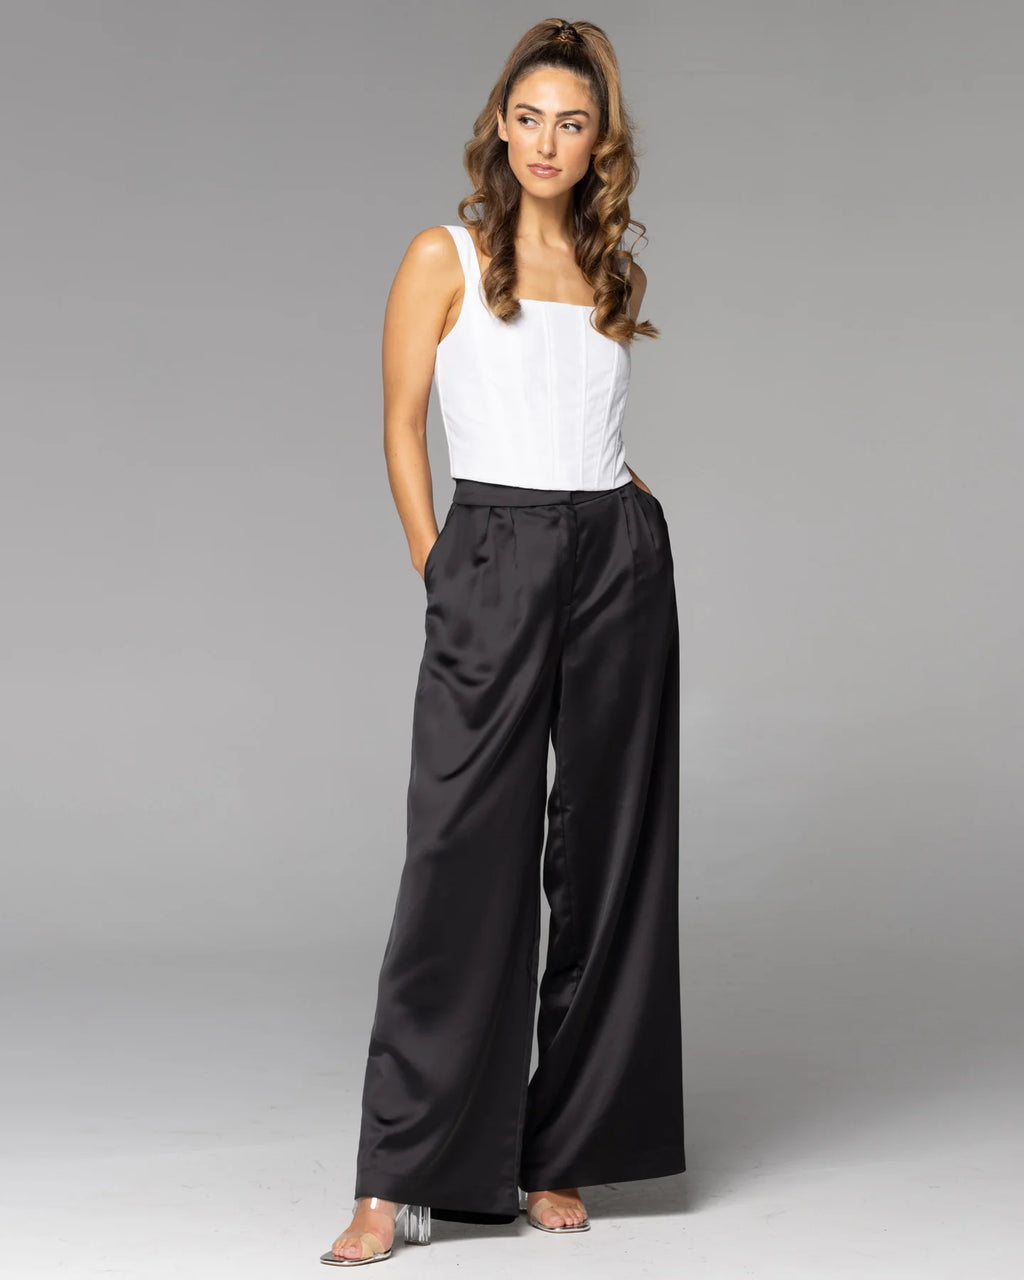 Fate and Becker Rock Steady Wide Leg Pant